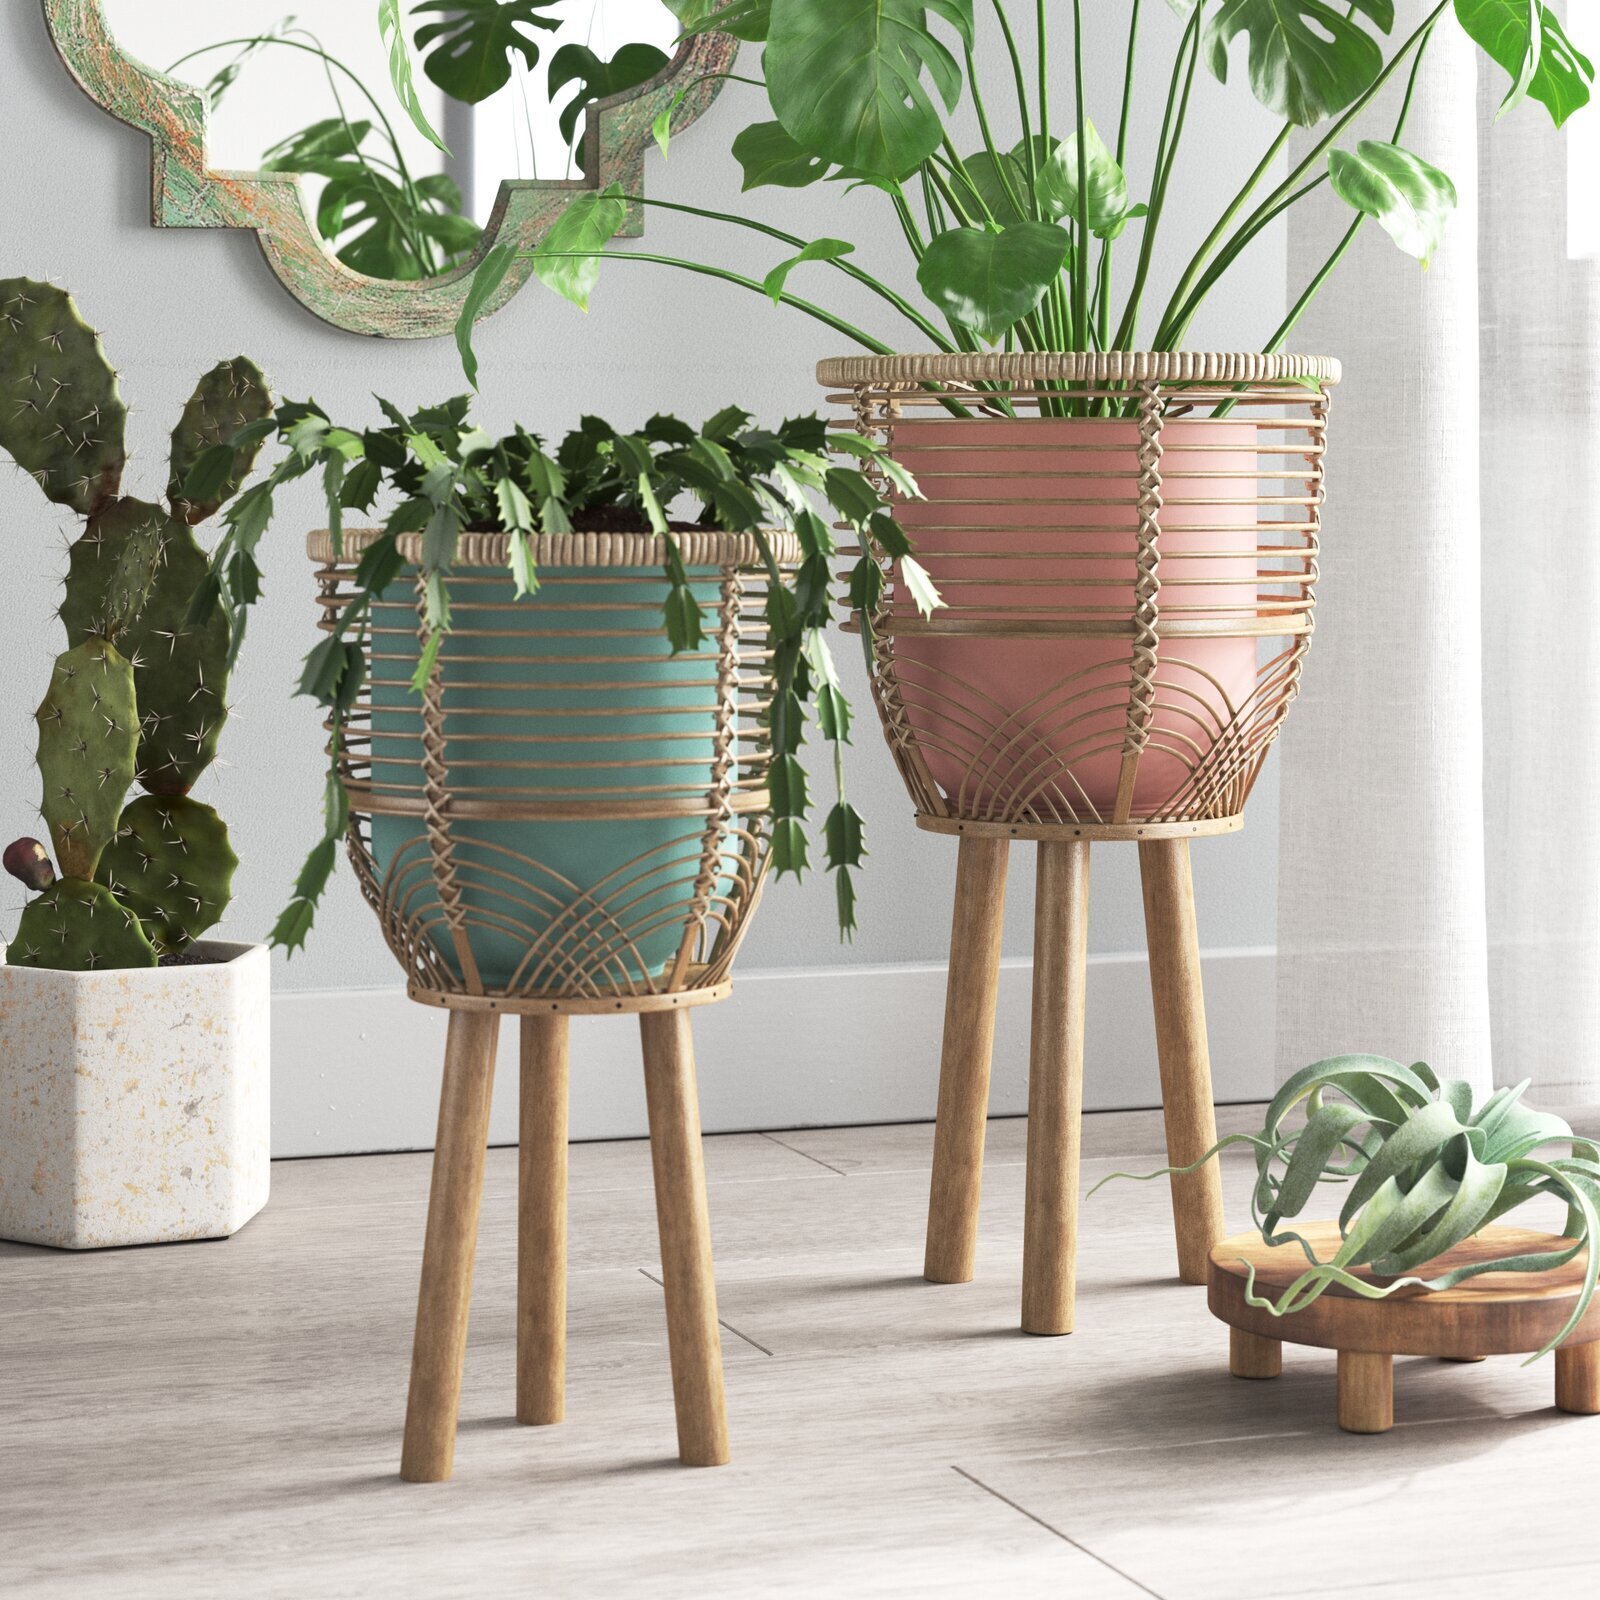 Set of two rattan planters